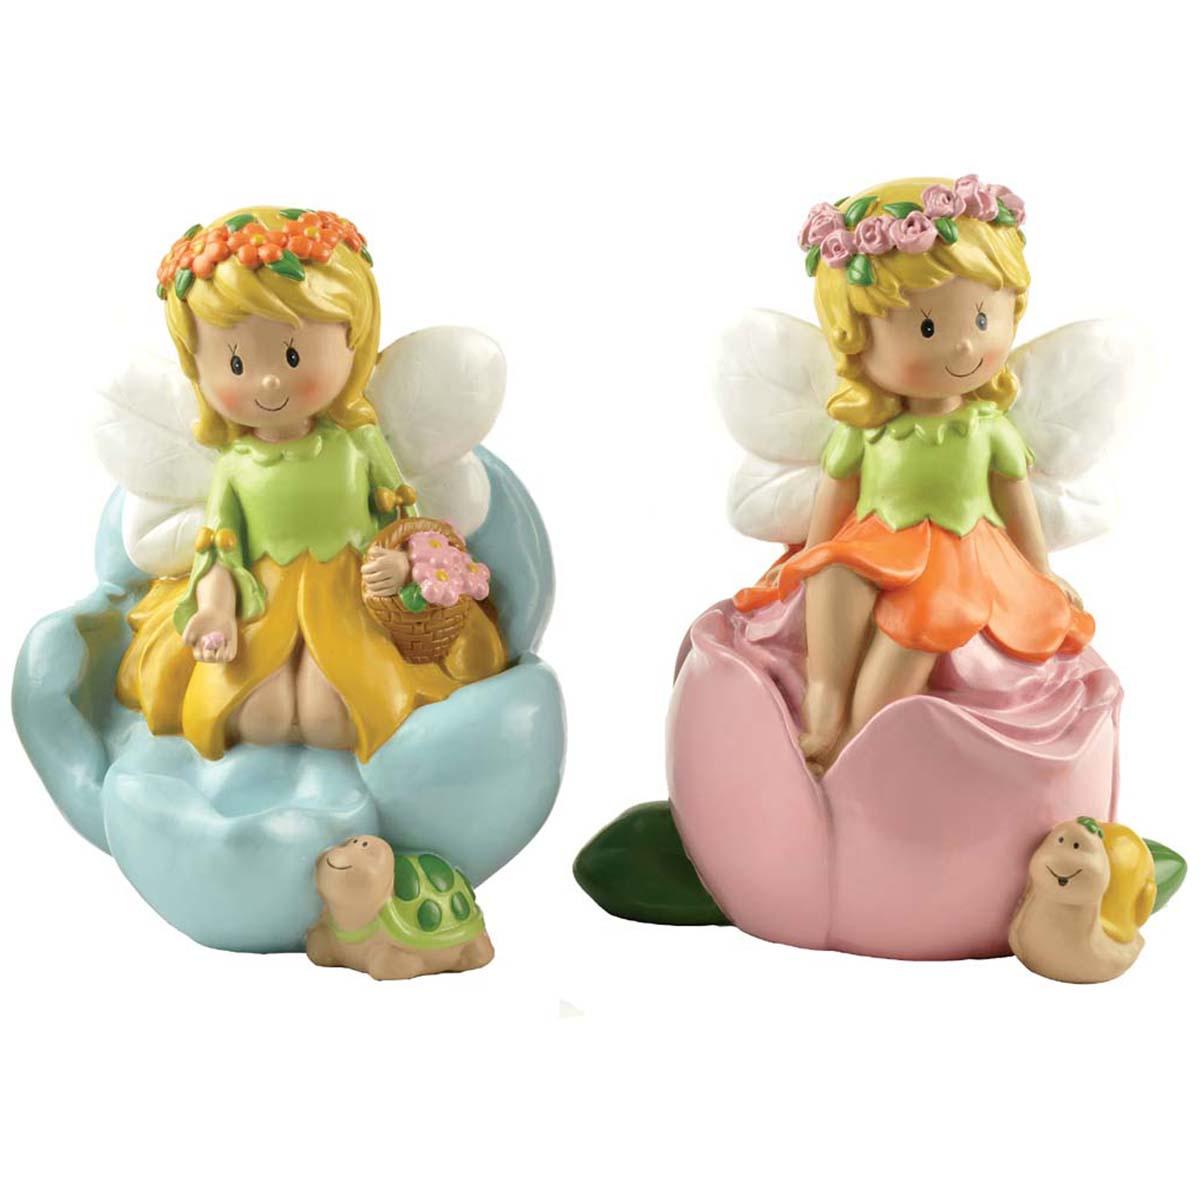 decorating resin figure cheapest price european style